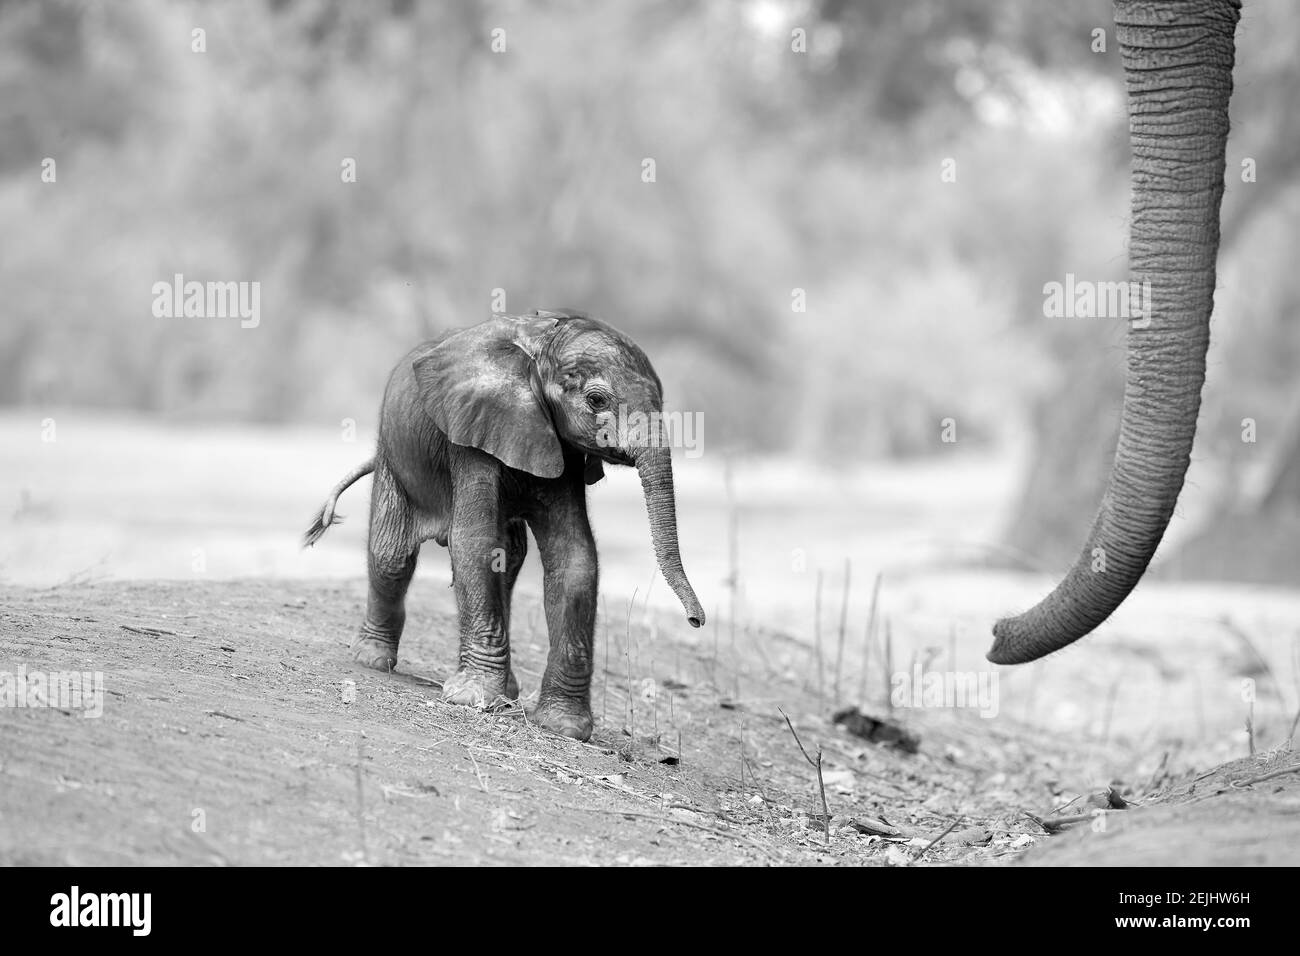 Black and white, artistic, touching picture of a fresh born African elephant calf, Loxodonta africana with mothers trunk. Stock Photo